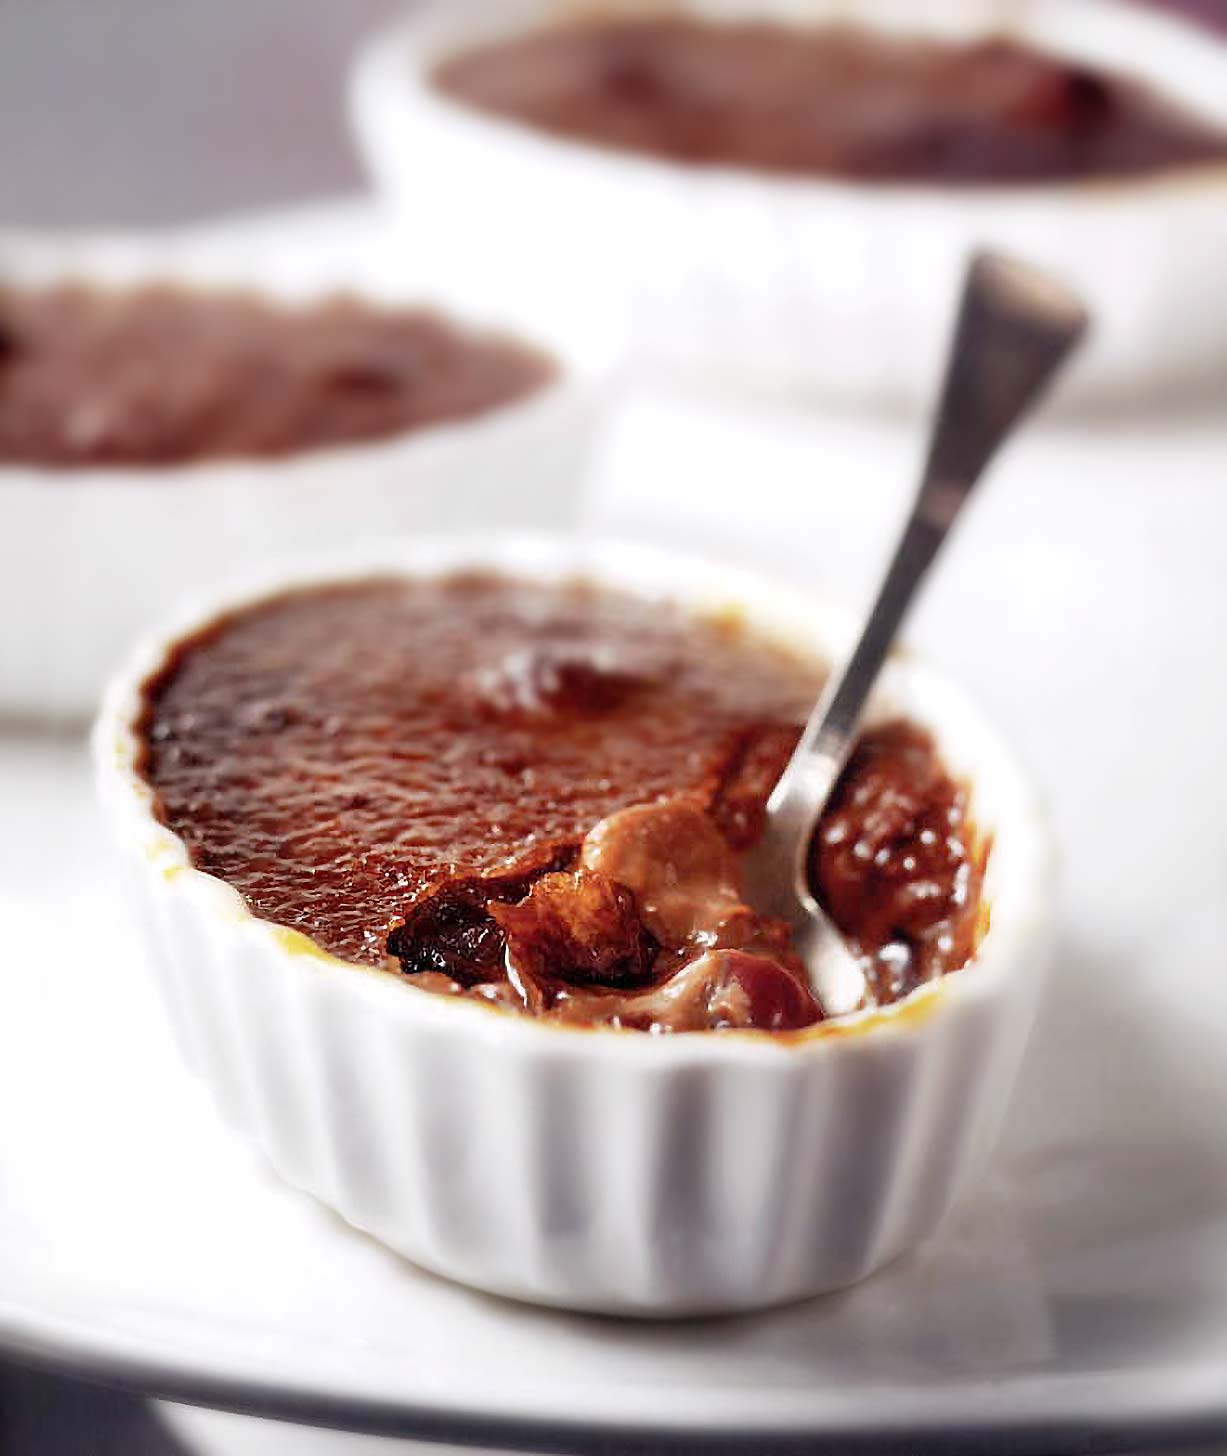 A single cherry and chocolate crème brûlée with a spoon resting in it.